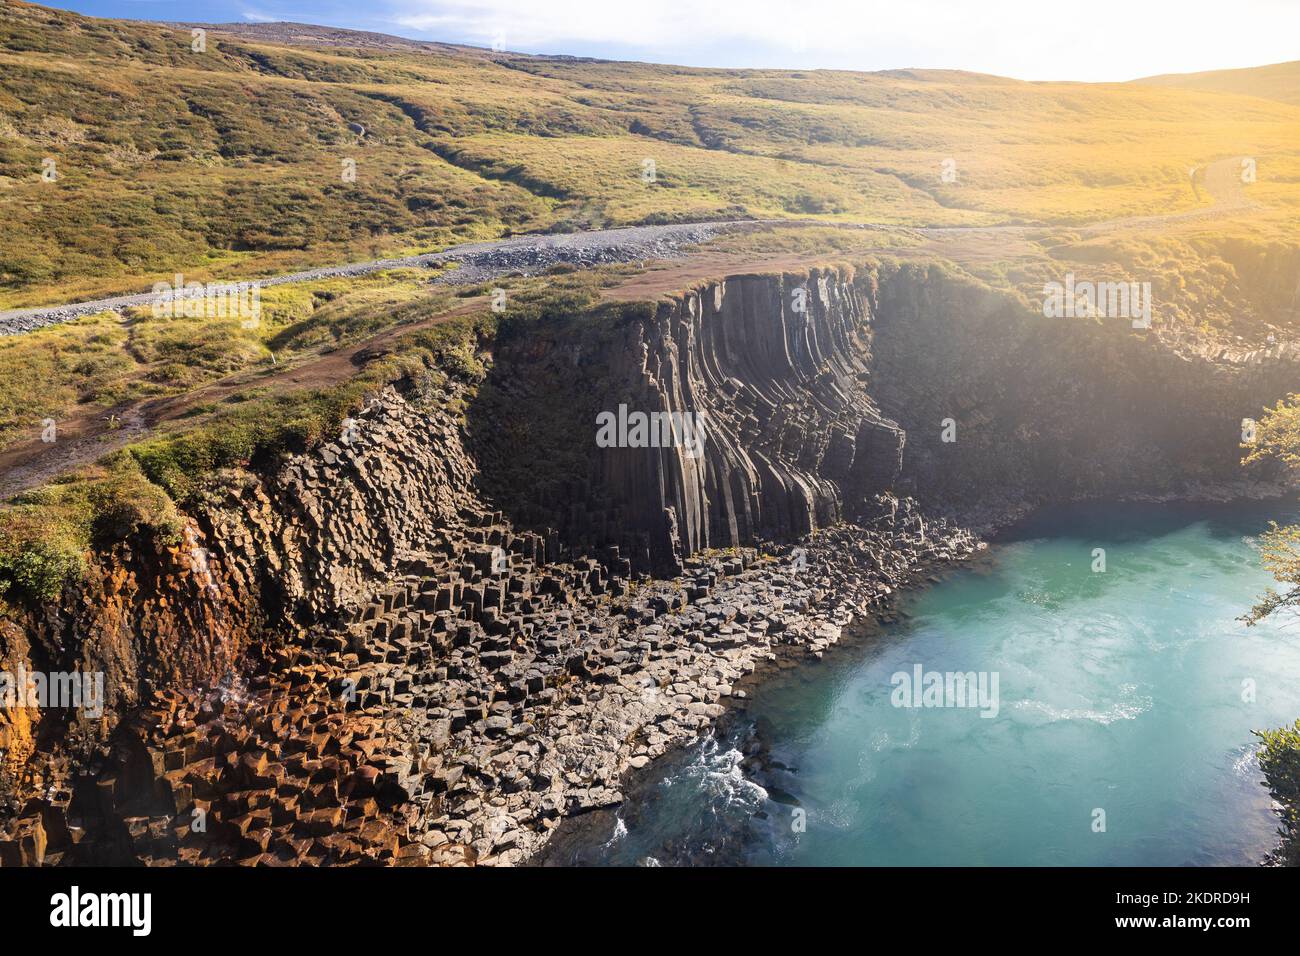 Closeup of Studlagil ravine in Jokuldalur Iceland, known for its columnar basalt rock formations and the blue-green water that runs through it. It Stock Photo